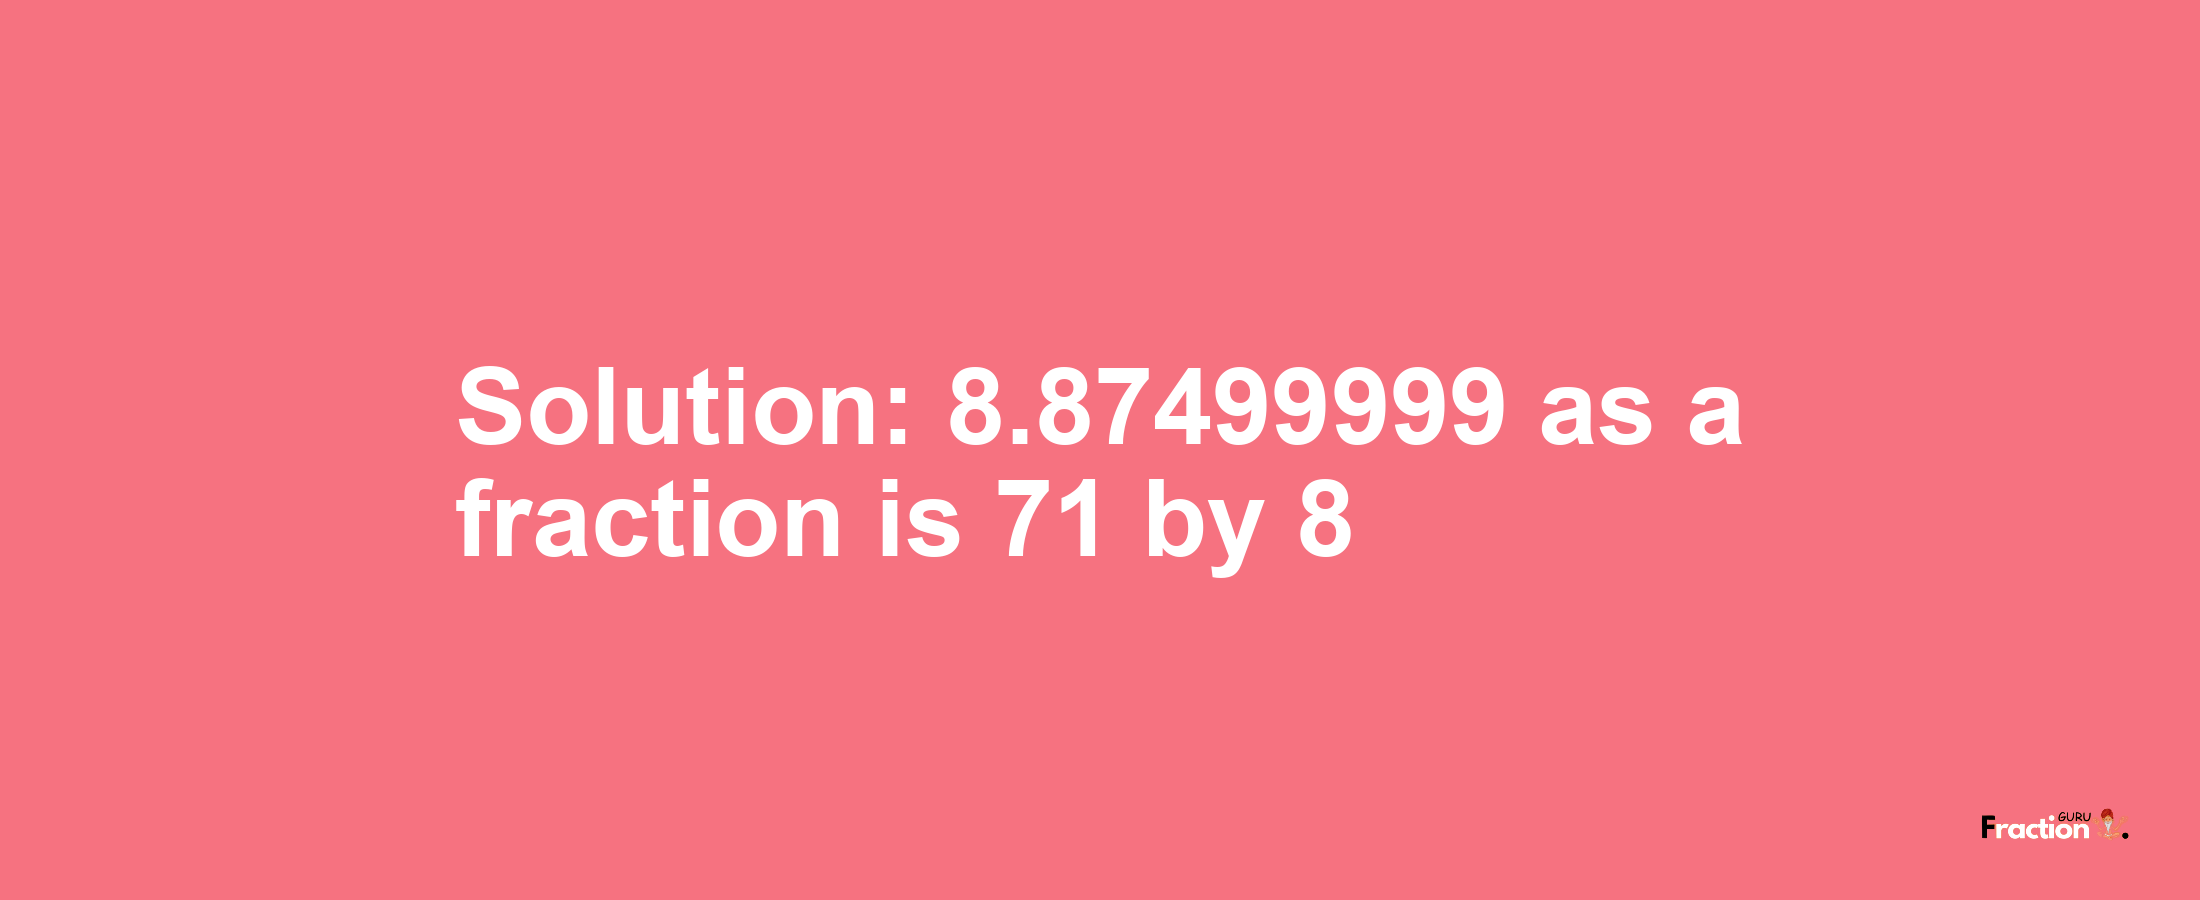 Solution:8.87499999 as a fraction is 71/8